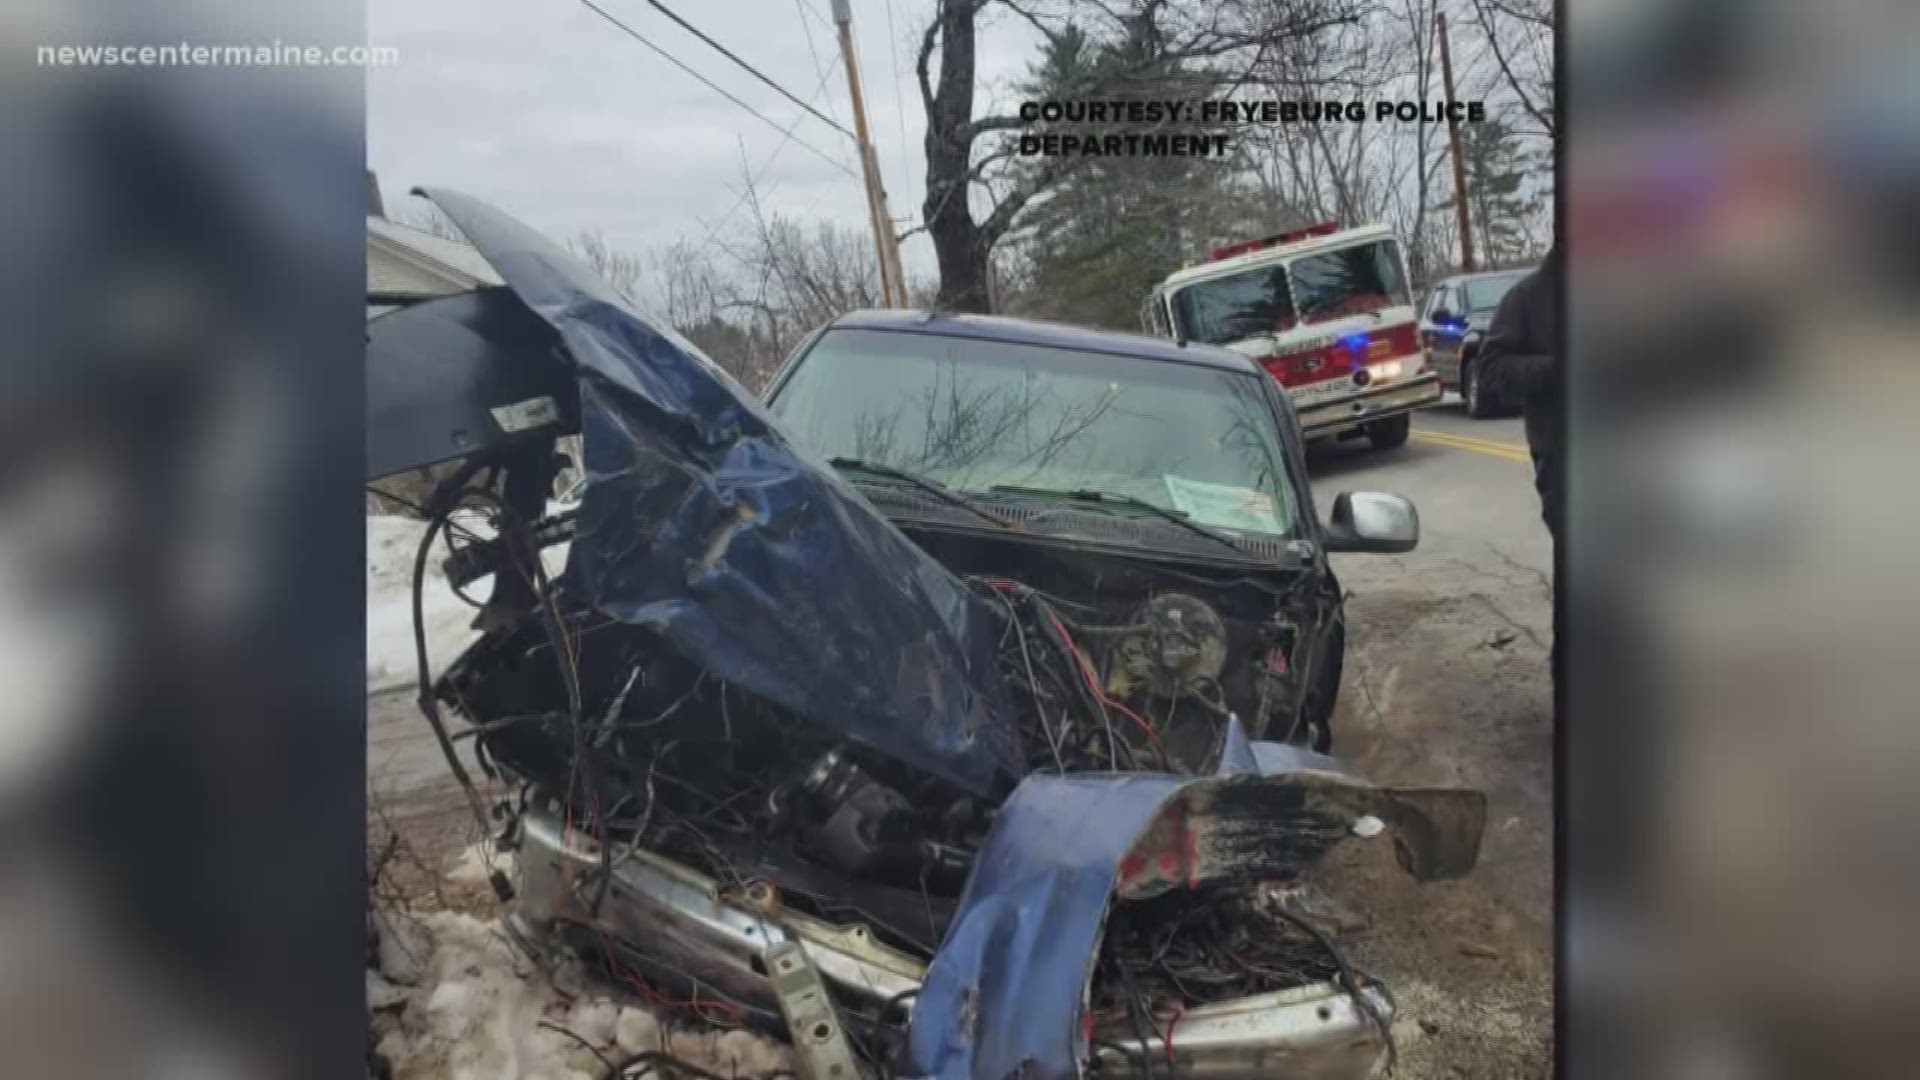 Chief of police in Fryeburg says it's a miracle that no one was injured in a crash involving a fully-loaded logging truck and a pickup truck.